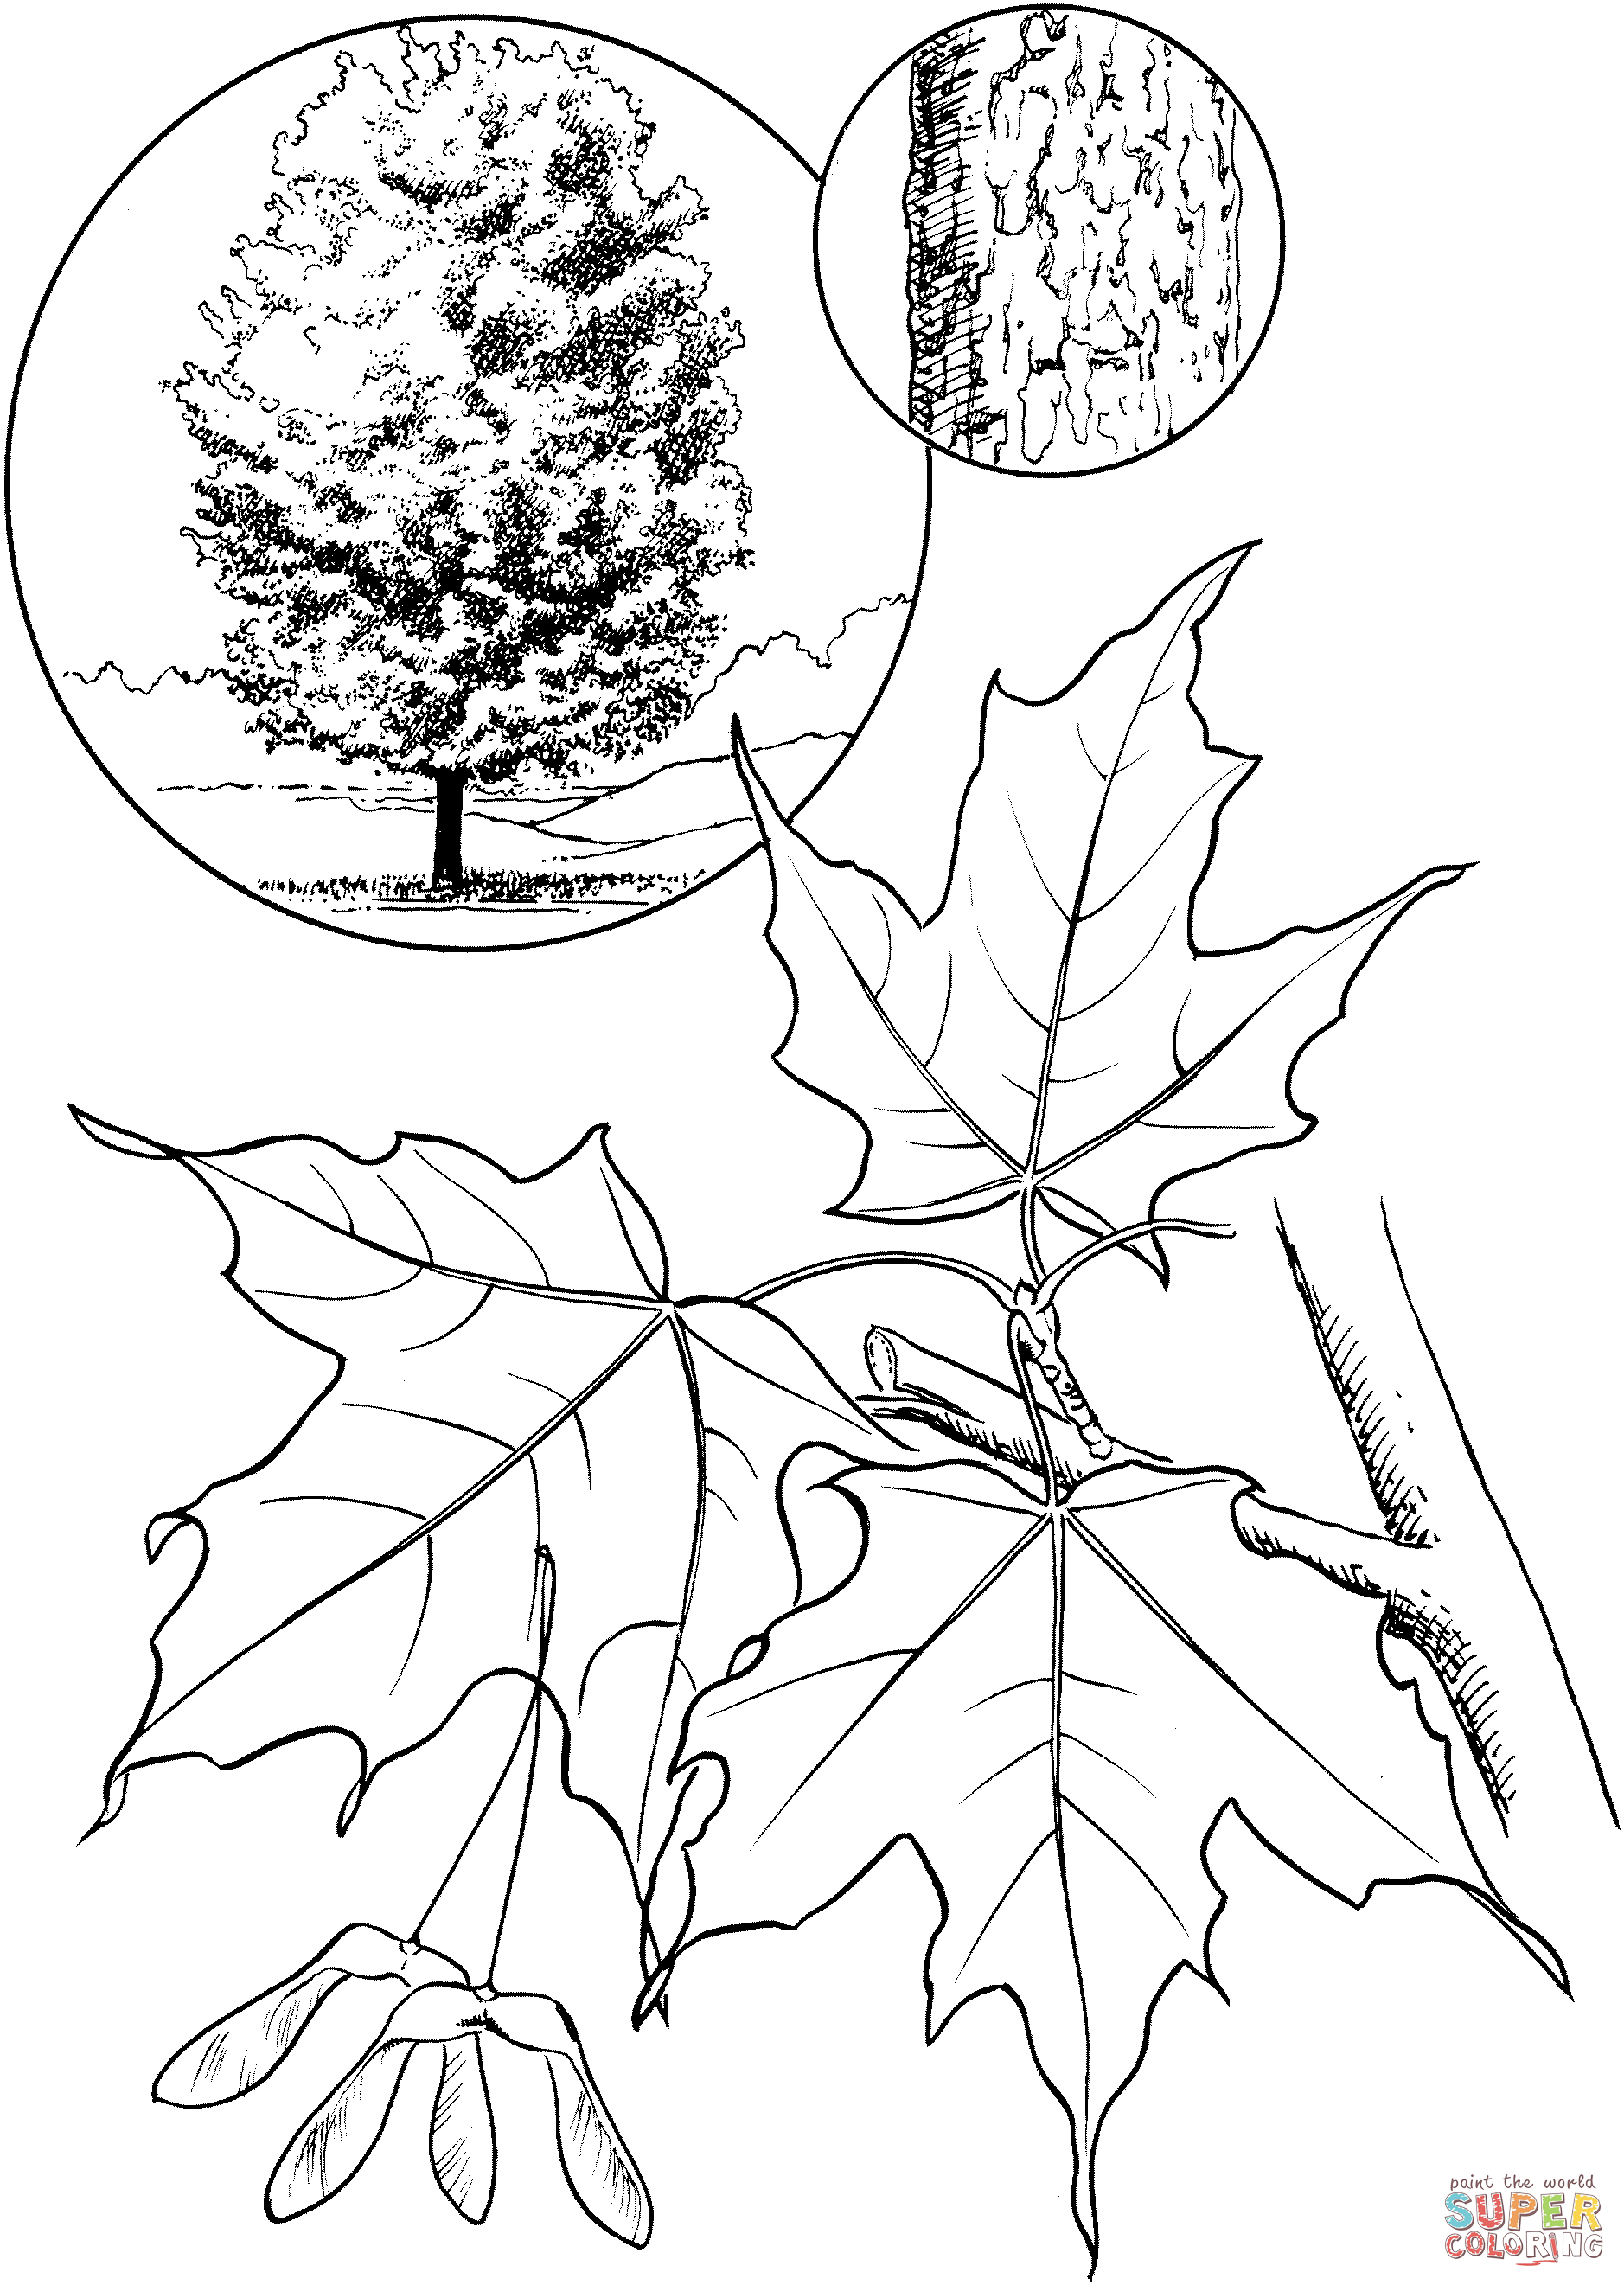 Maple Tree coloring #14, Download drawings